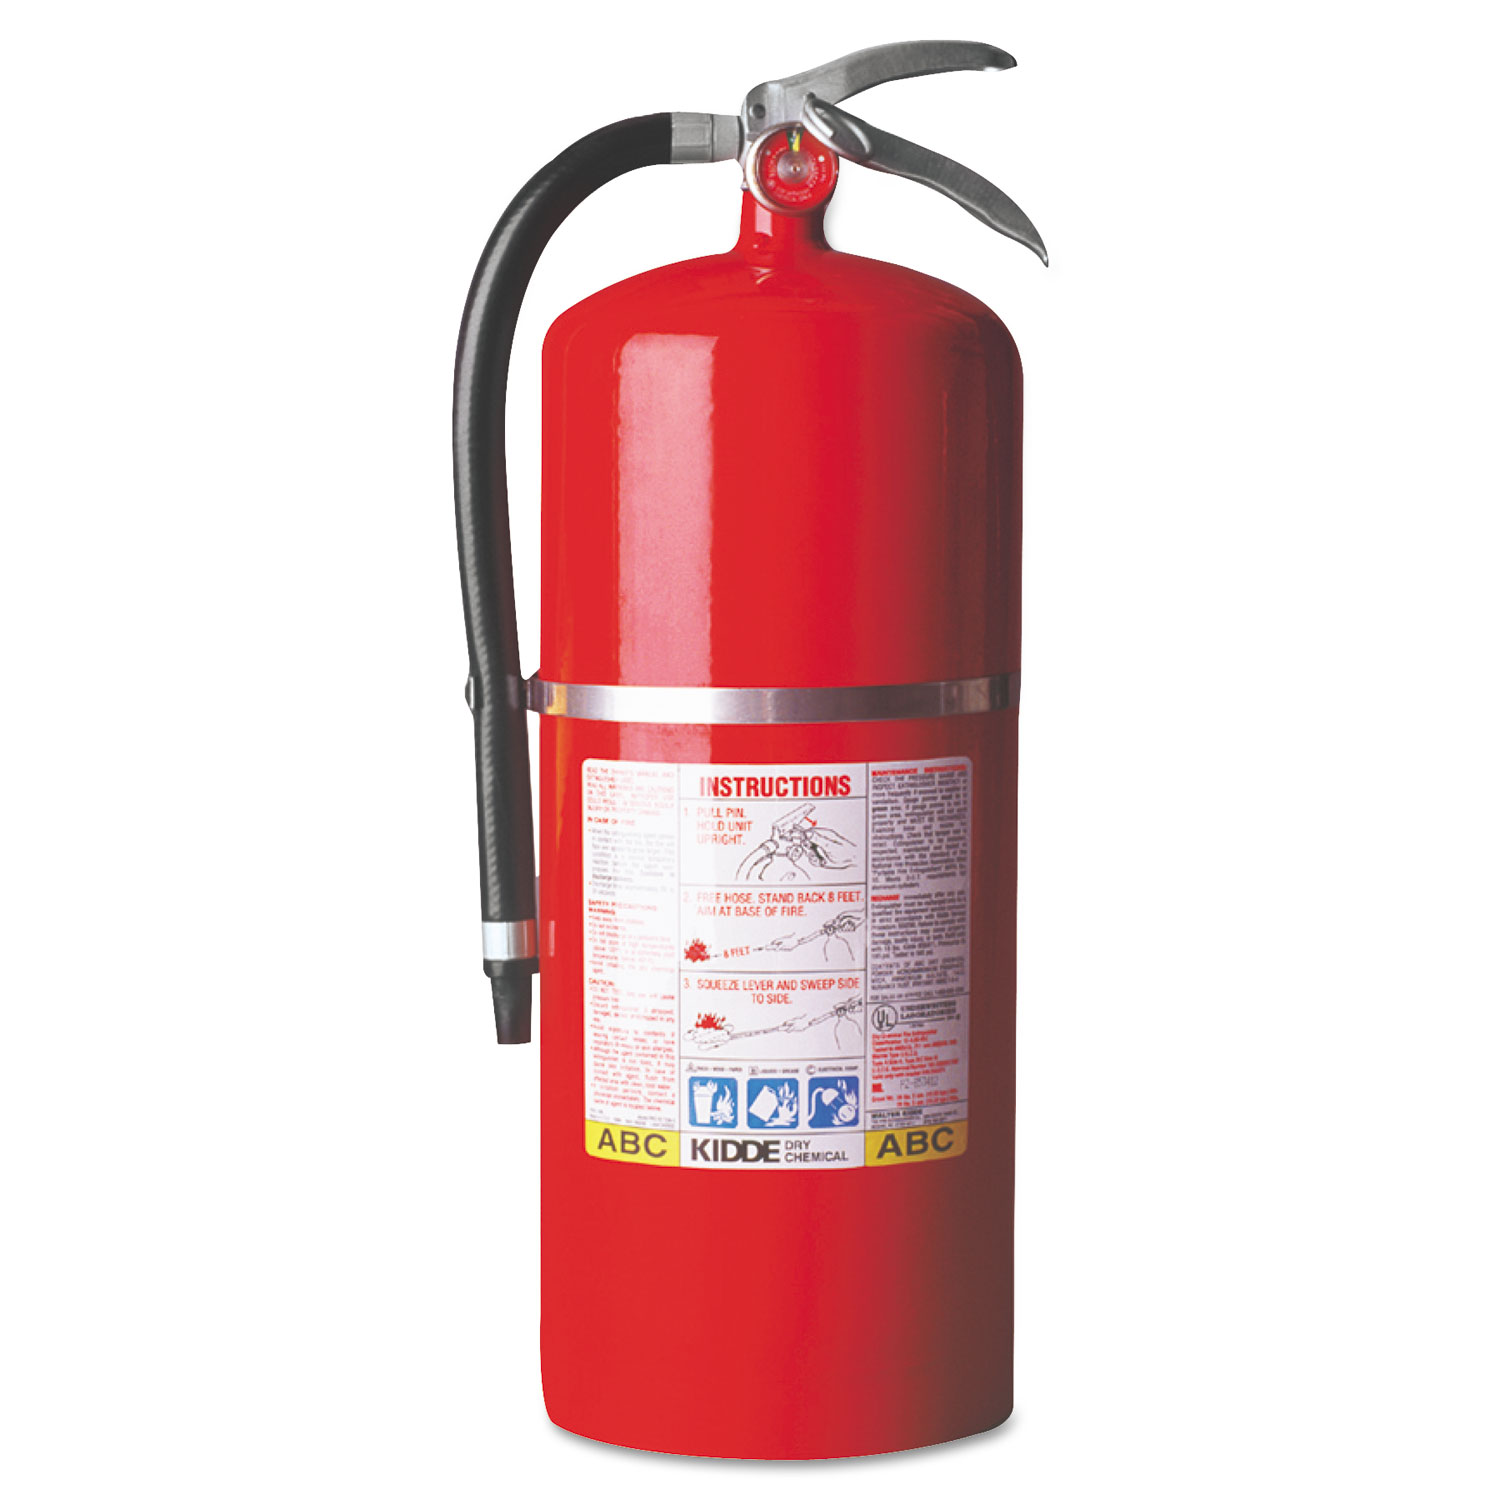 ProPlus 20 MP Dry-Chemical Fire Extinguisher, 20lb, 6-A:120-B:C